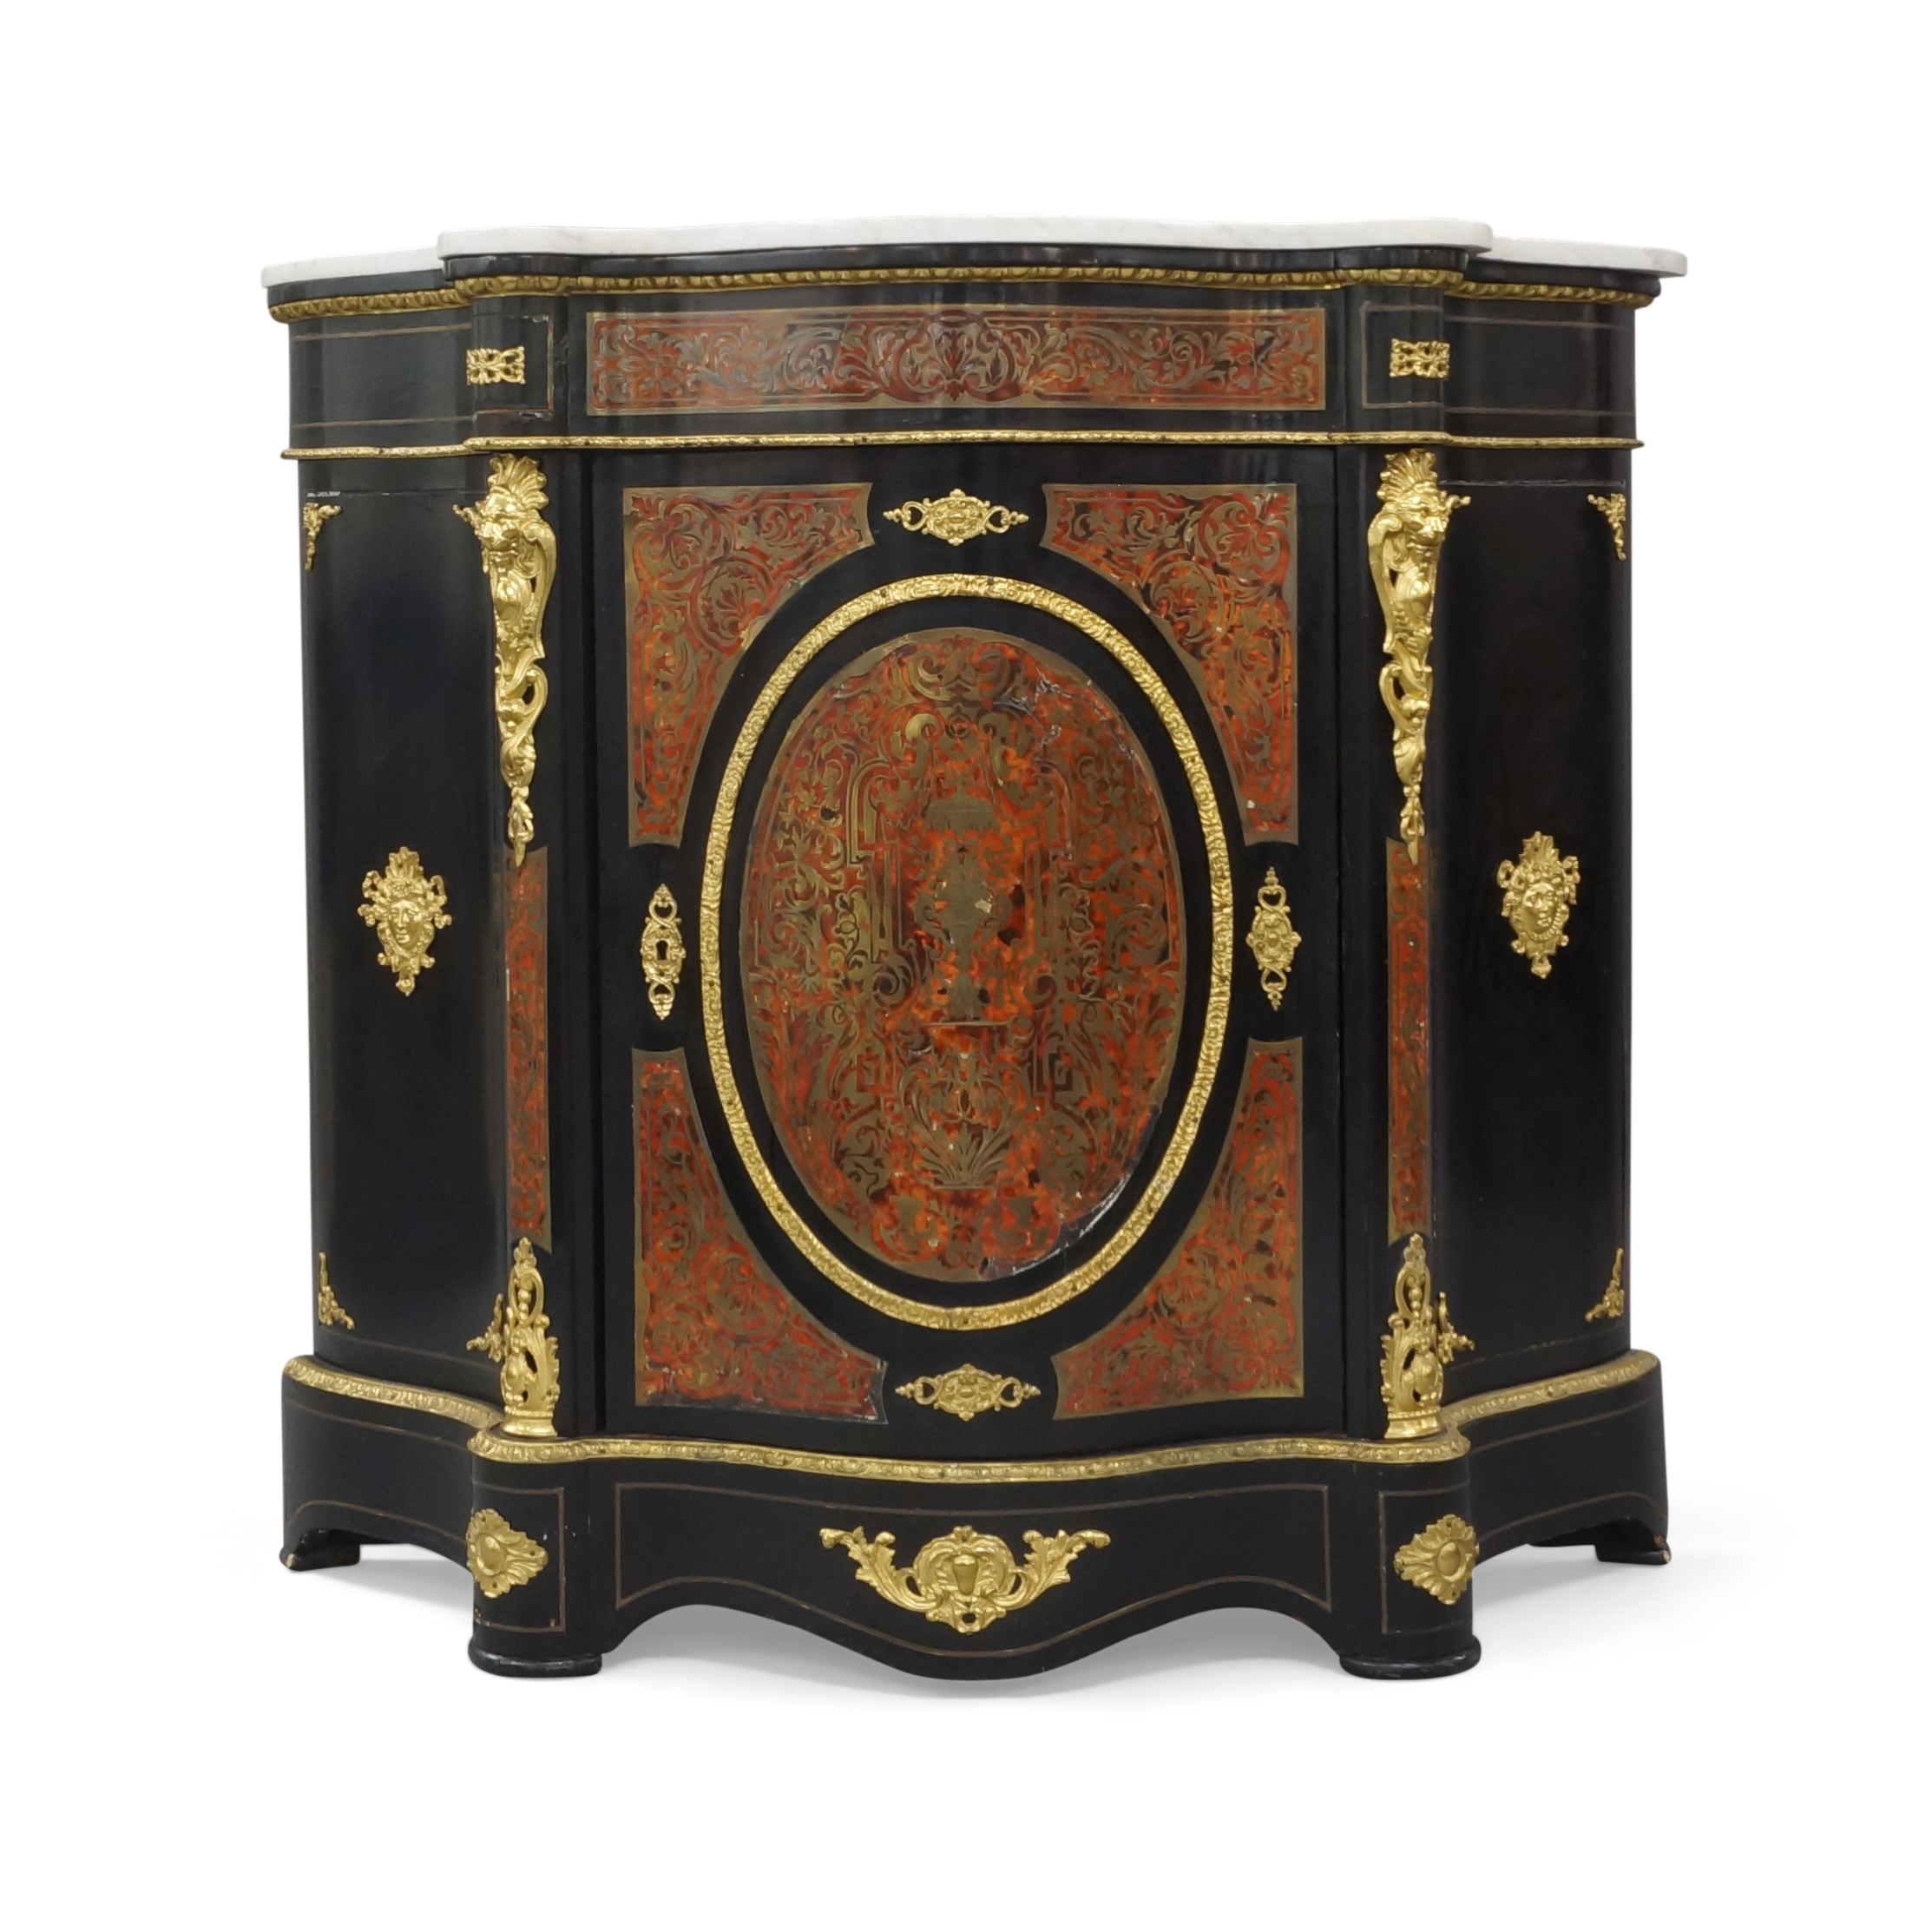 A French ormolu-mounted ebonised Boulle cabinet, late 19th century, the central door enclosing la...